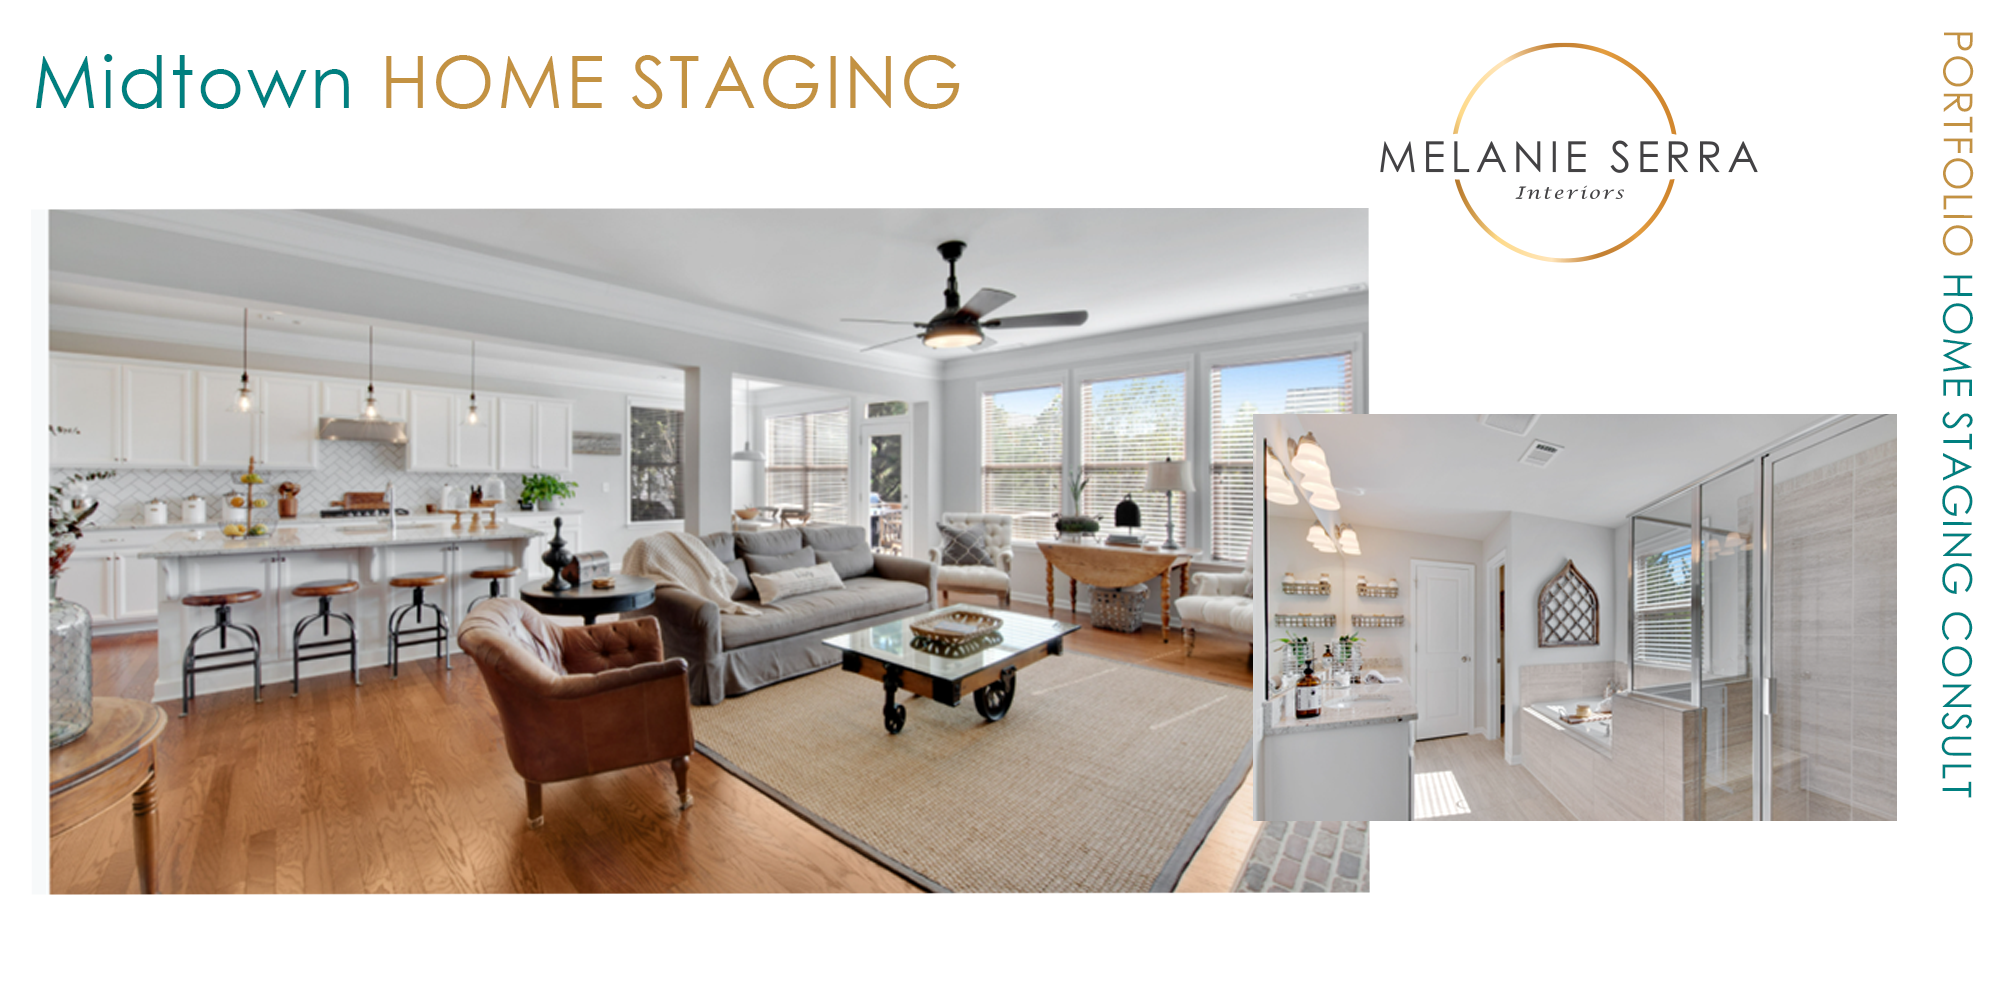 Midtown Staging